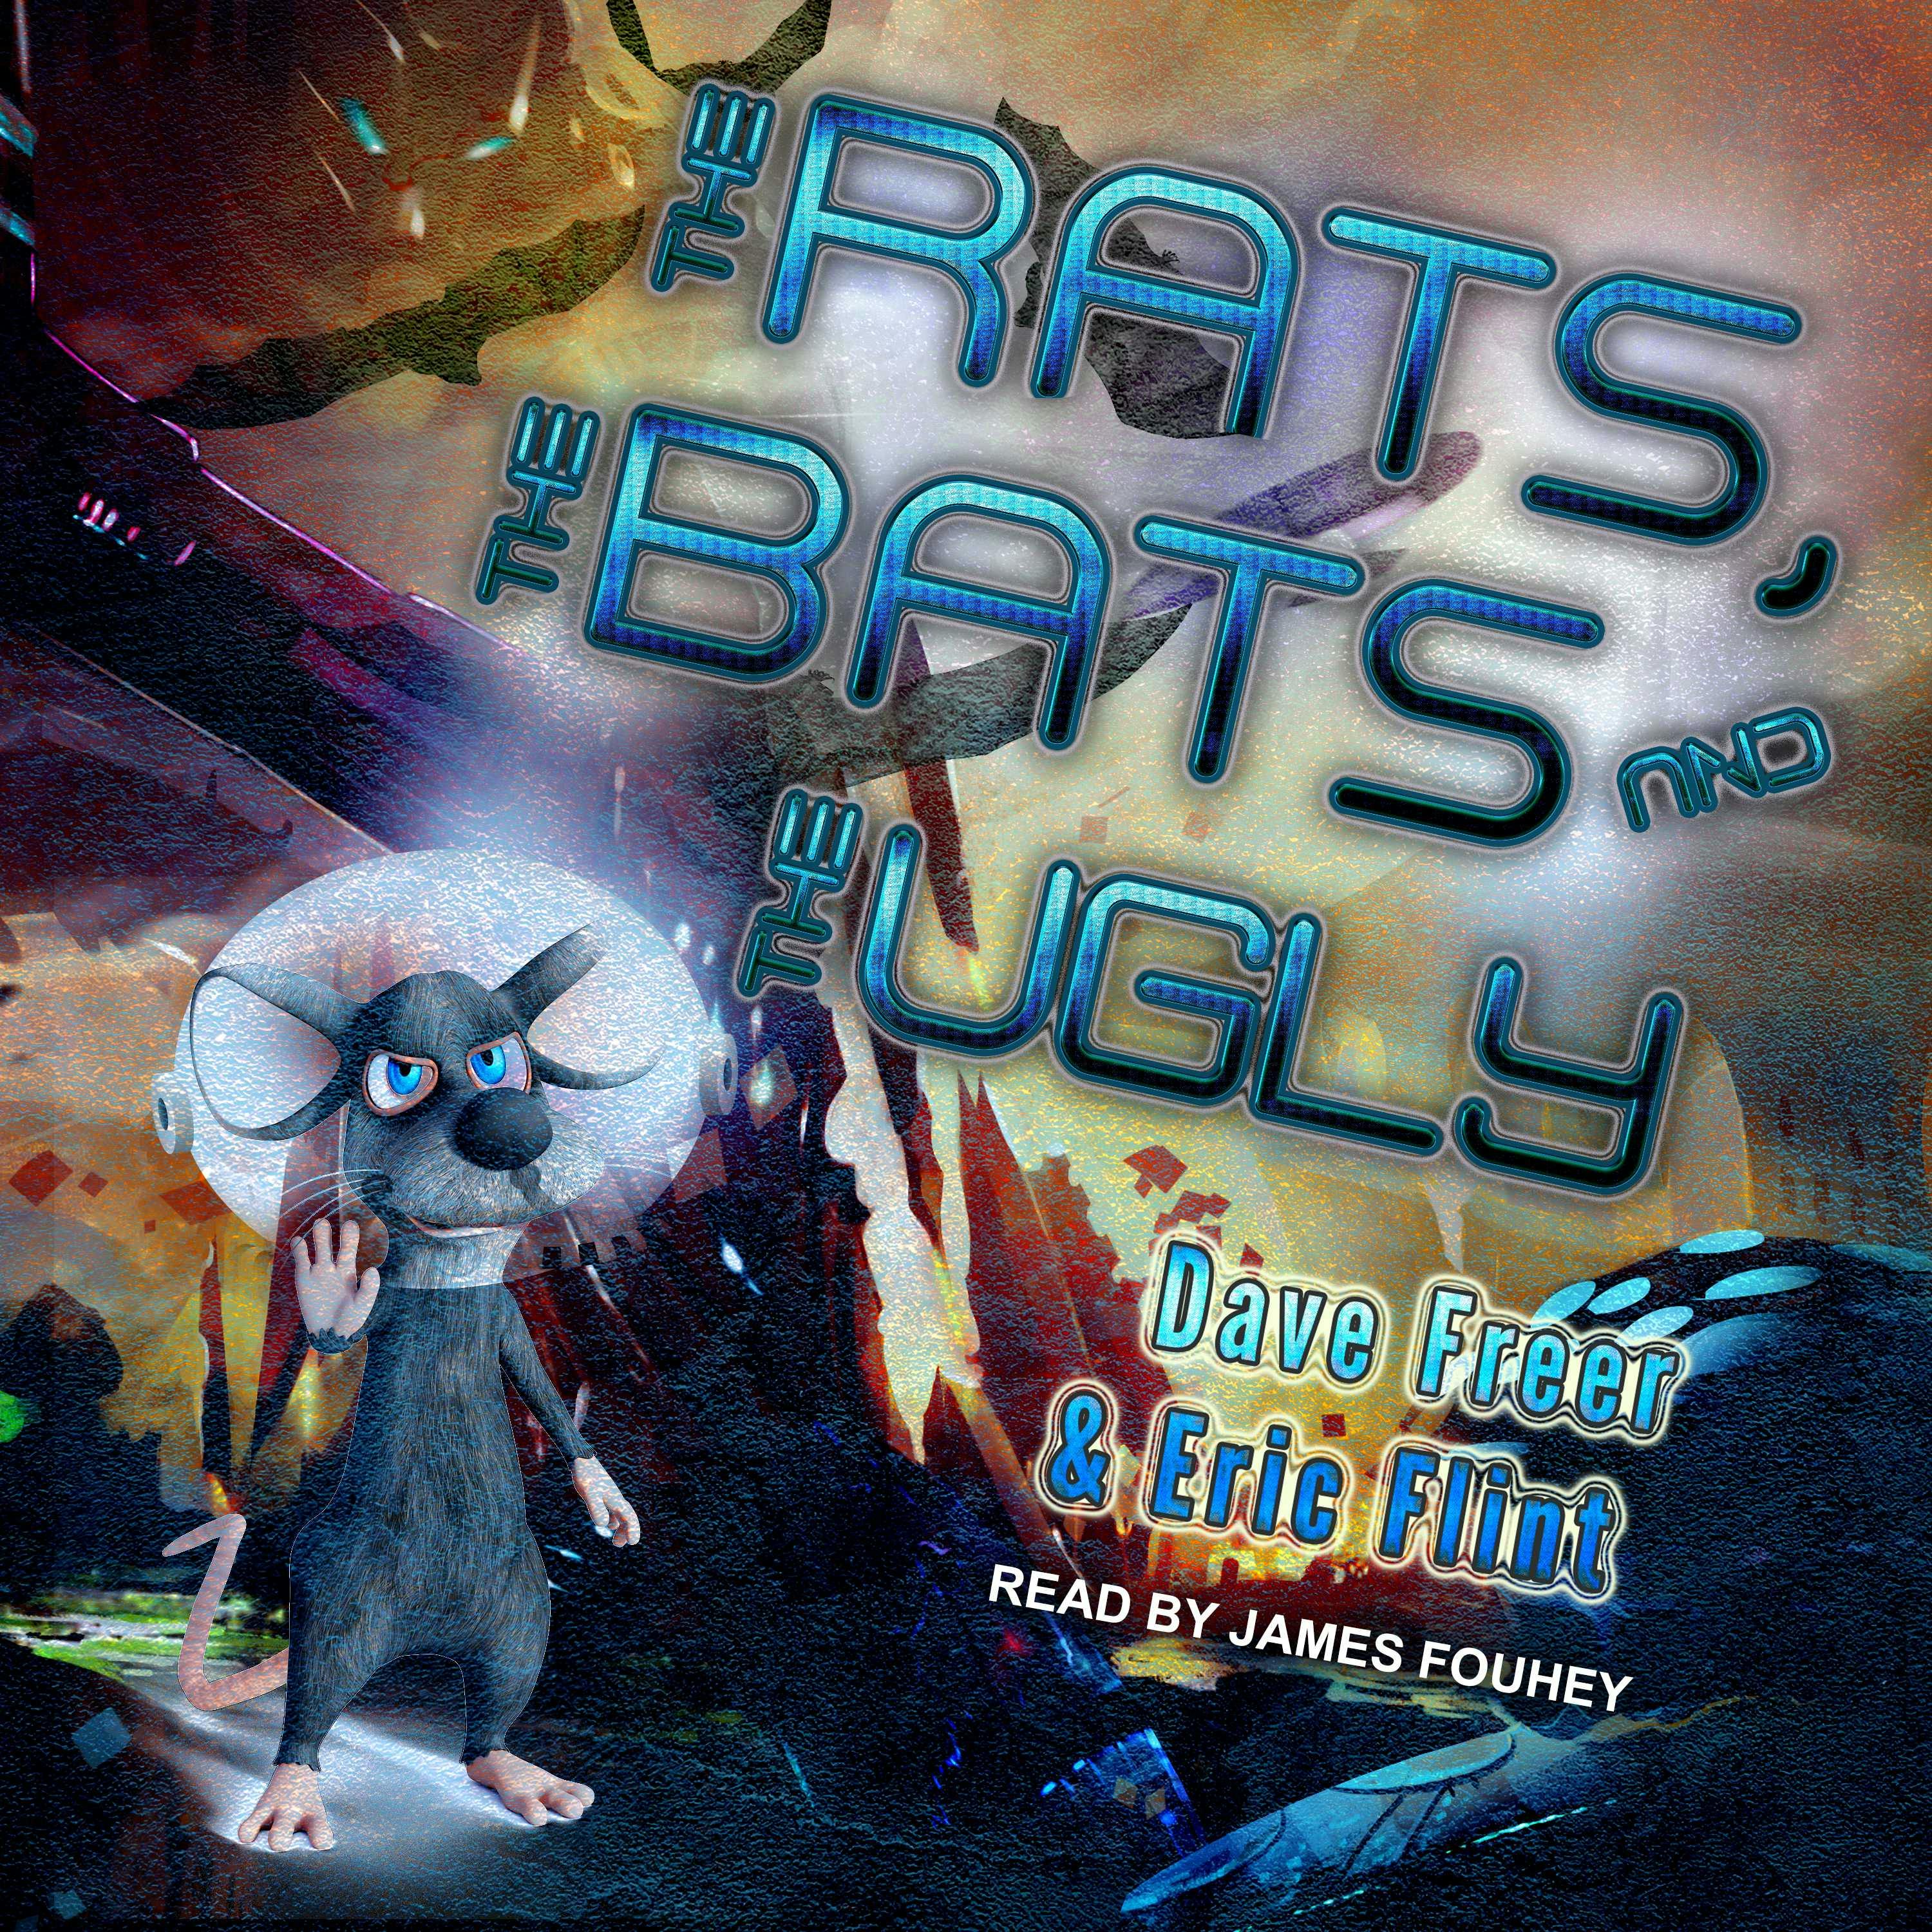 The Rats, the Bats, and the Ugly - undefined